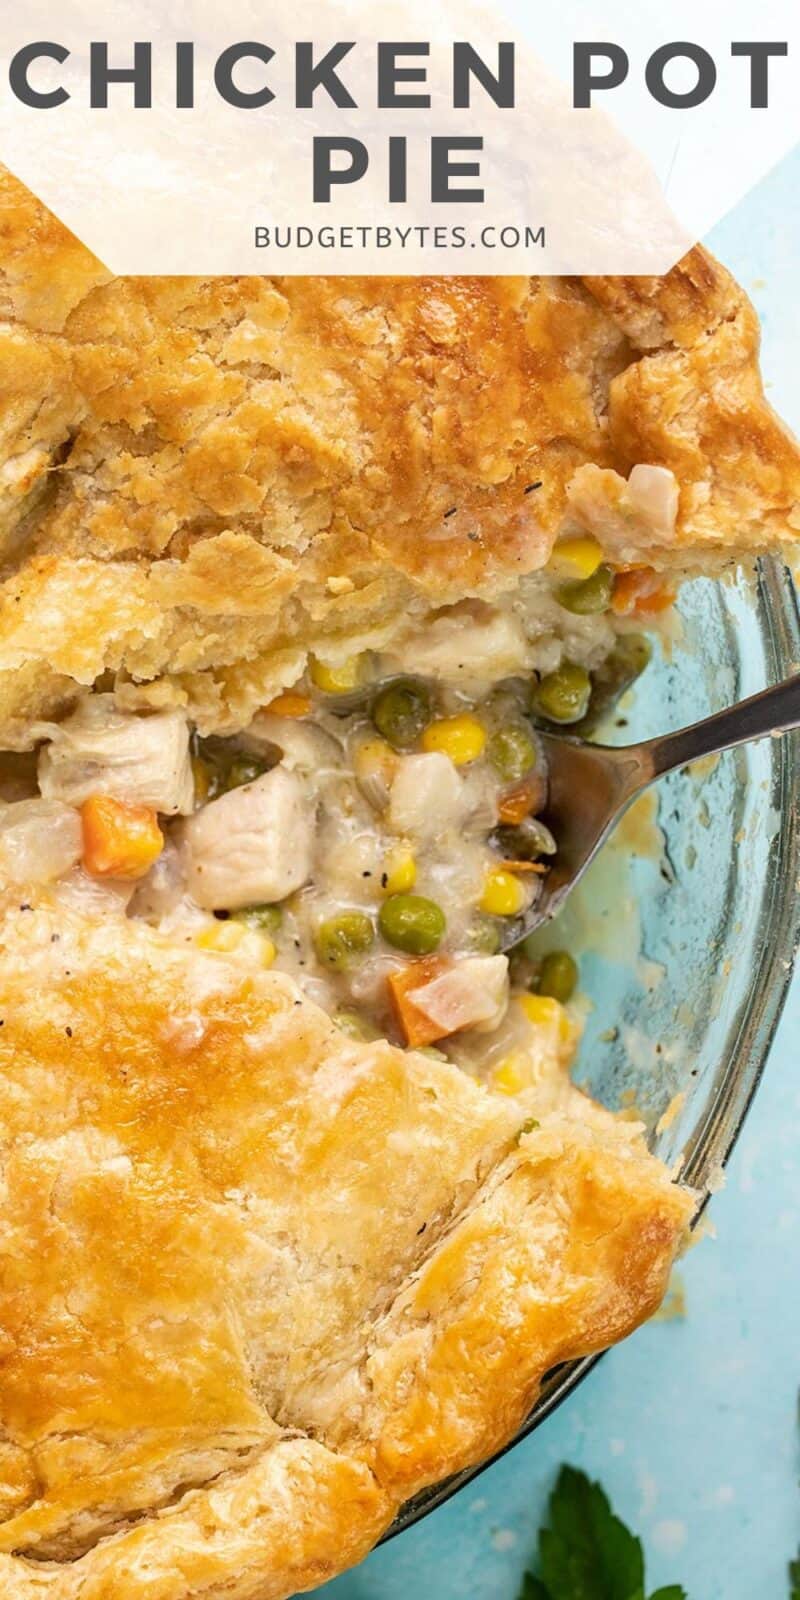 Overhead view of a chicken pot pie with a slice removed.